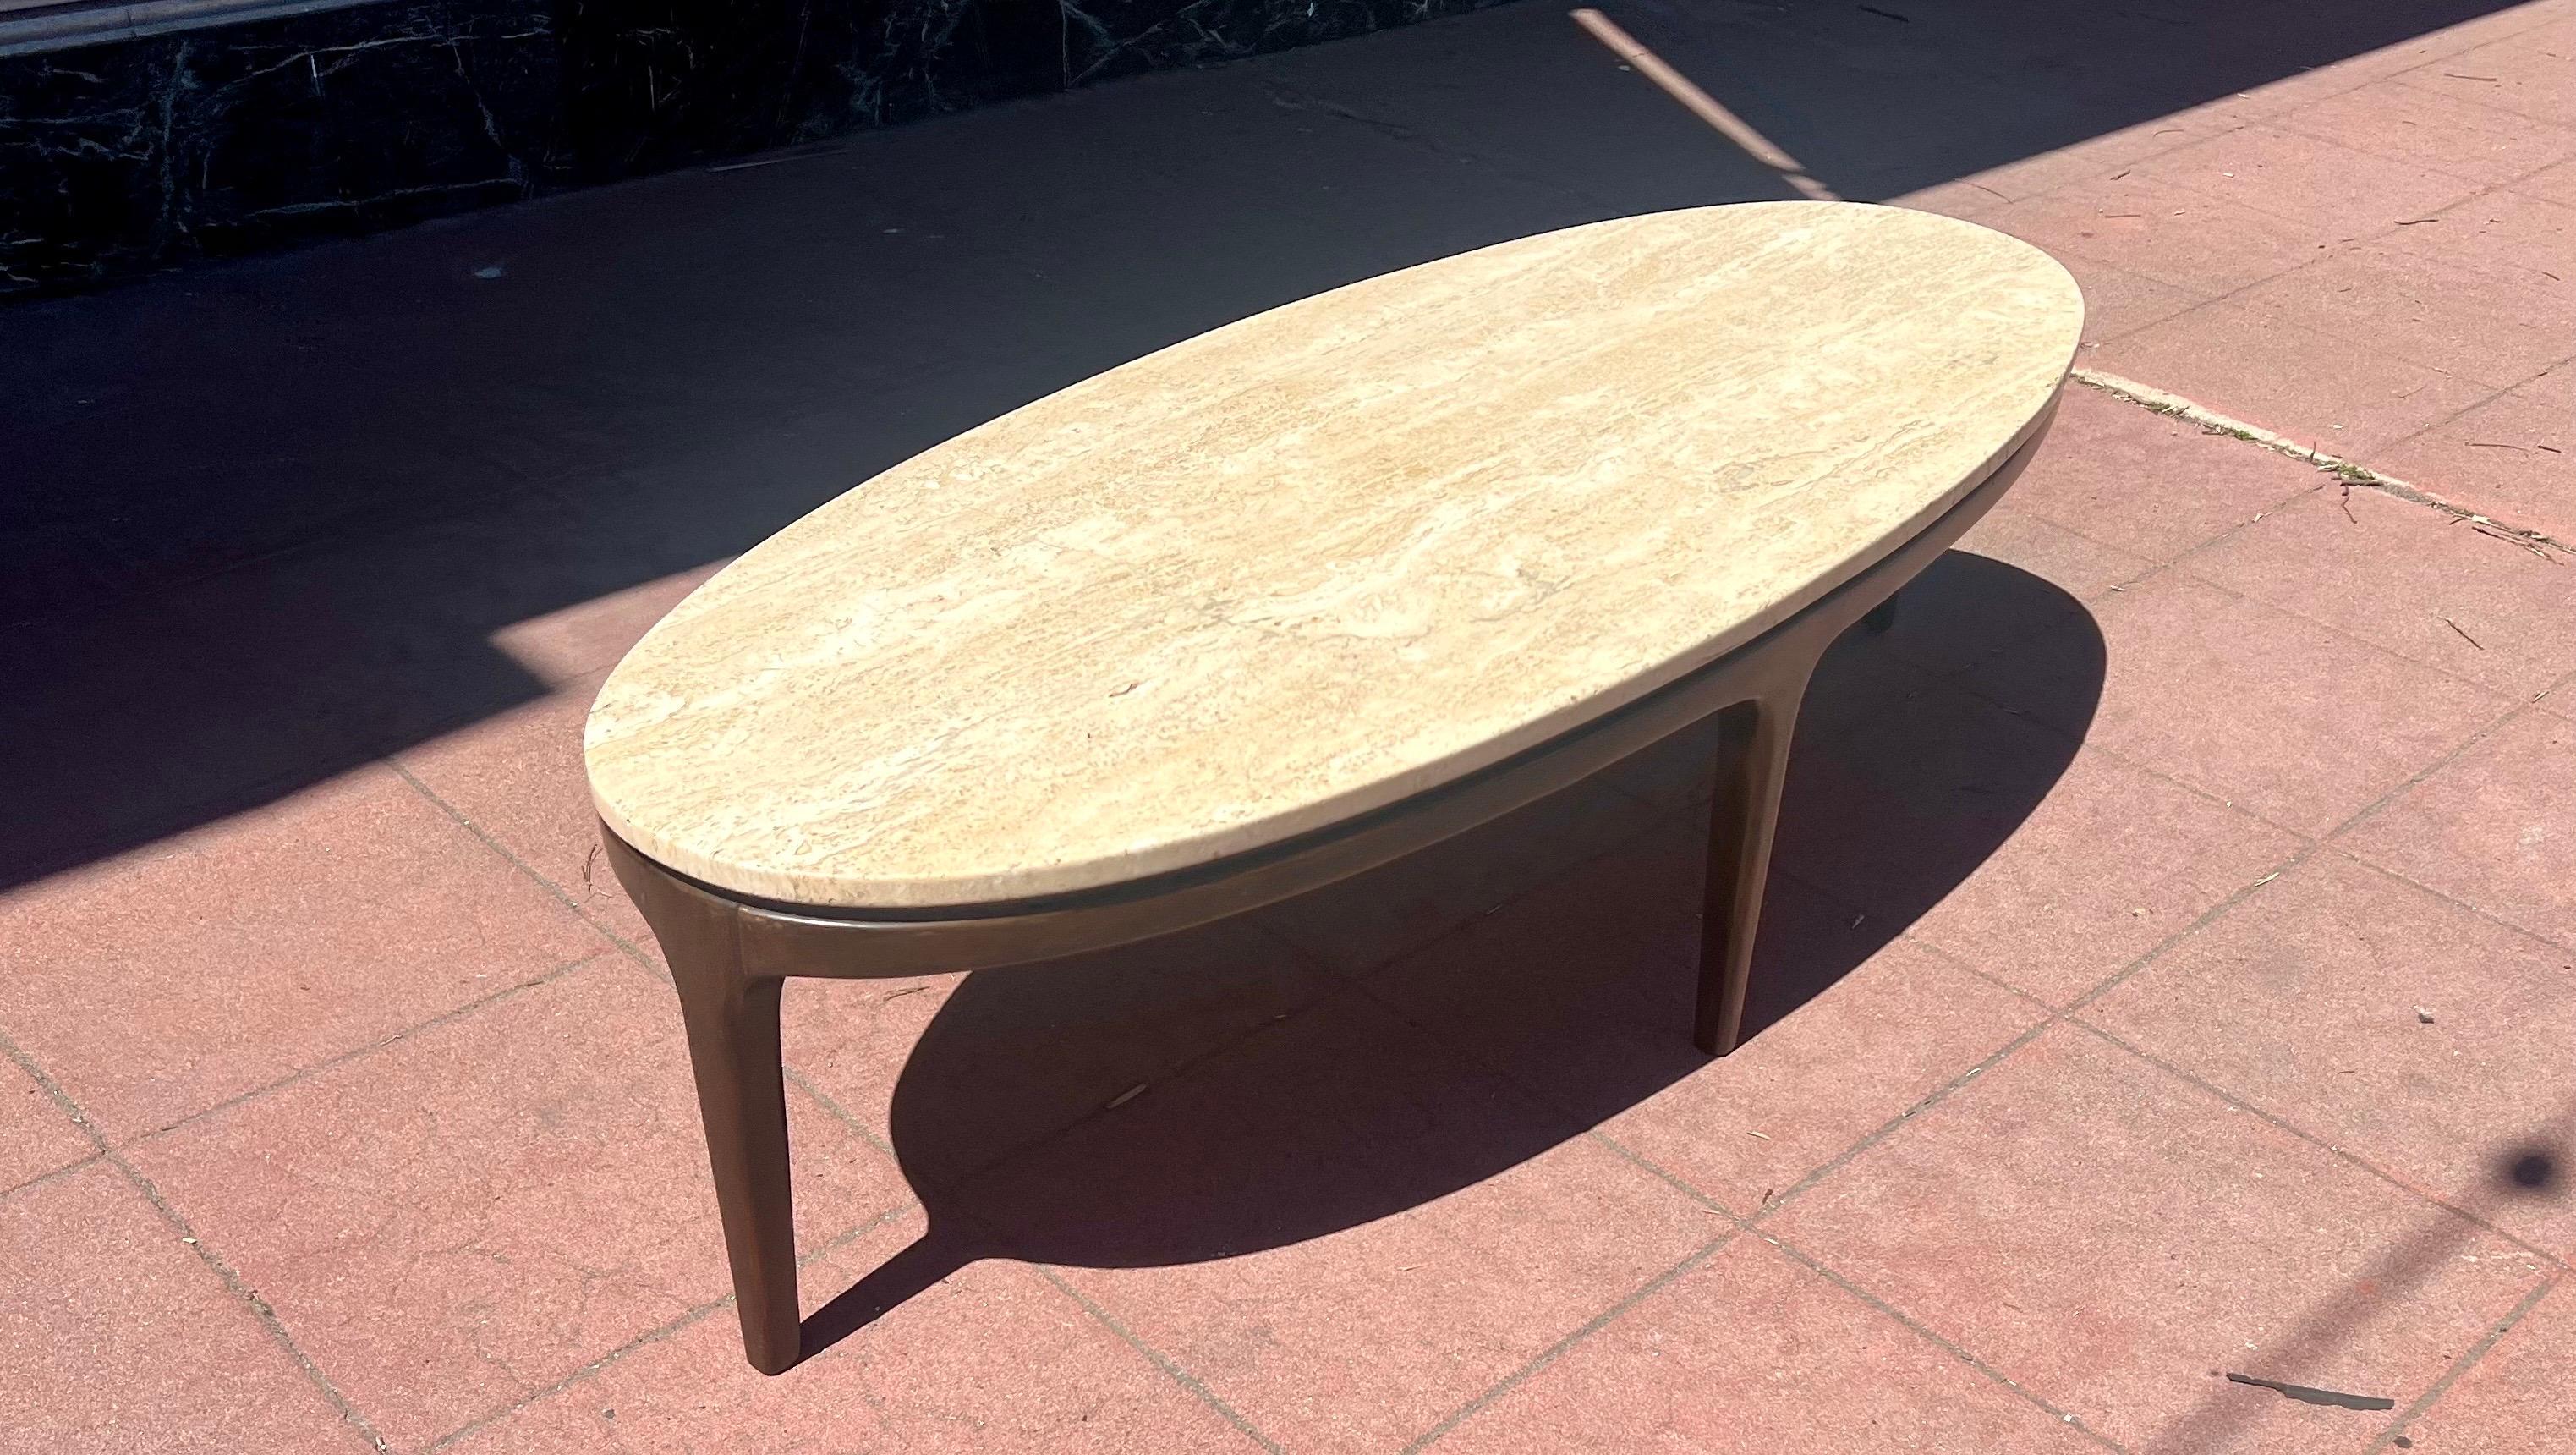 20th Century American Mid Century Modern Gorgeous Mable & Walnut Coffee Table